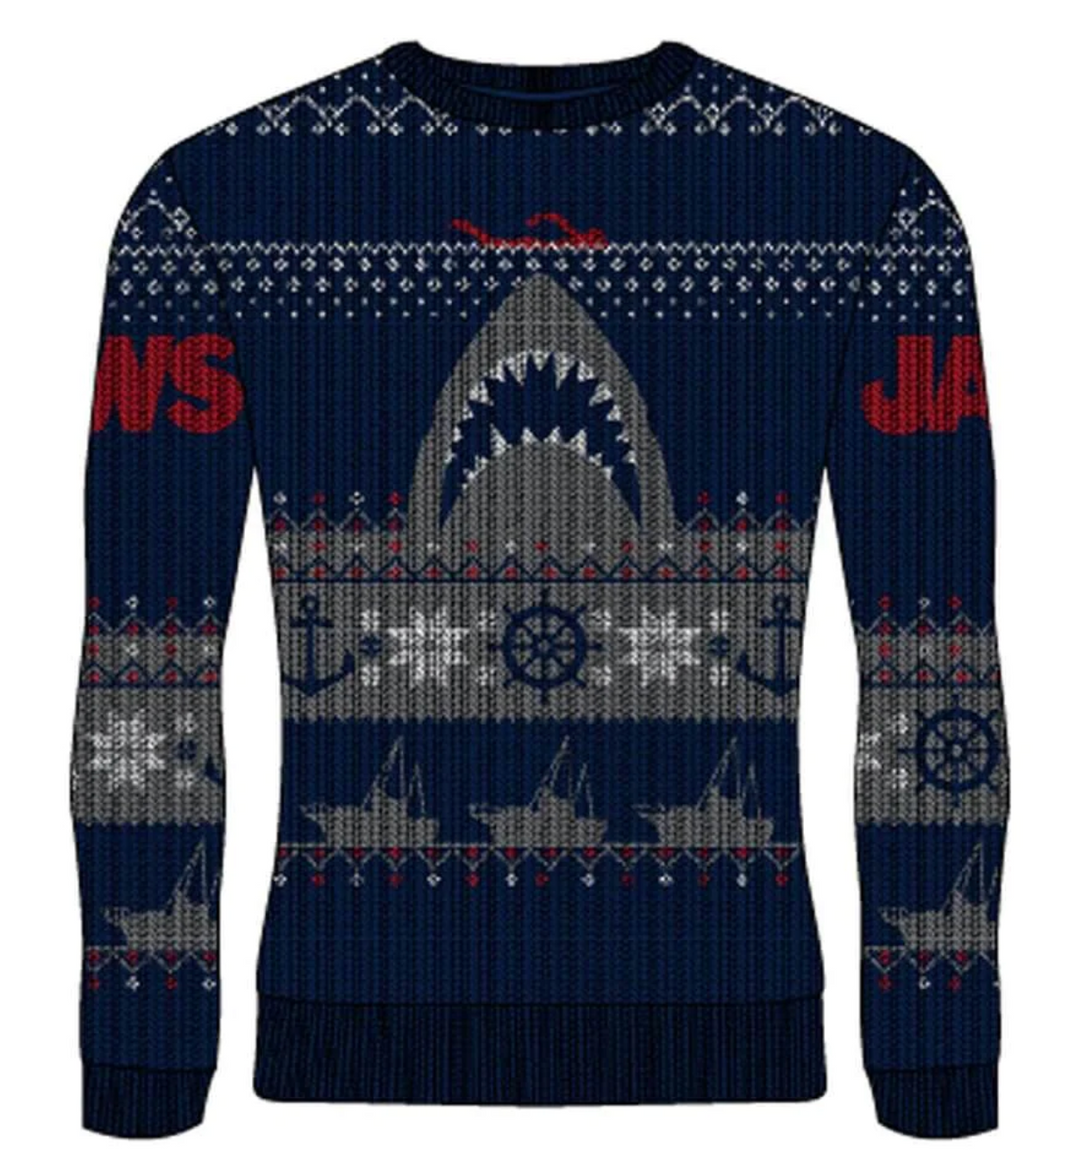 Official Jaws Knitted Unisex Christmas Jumper